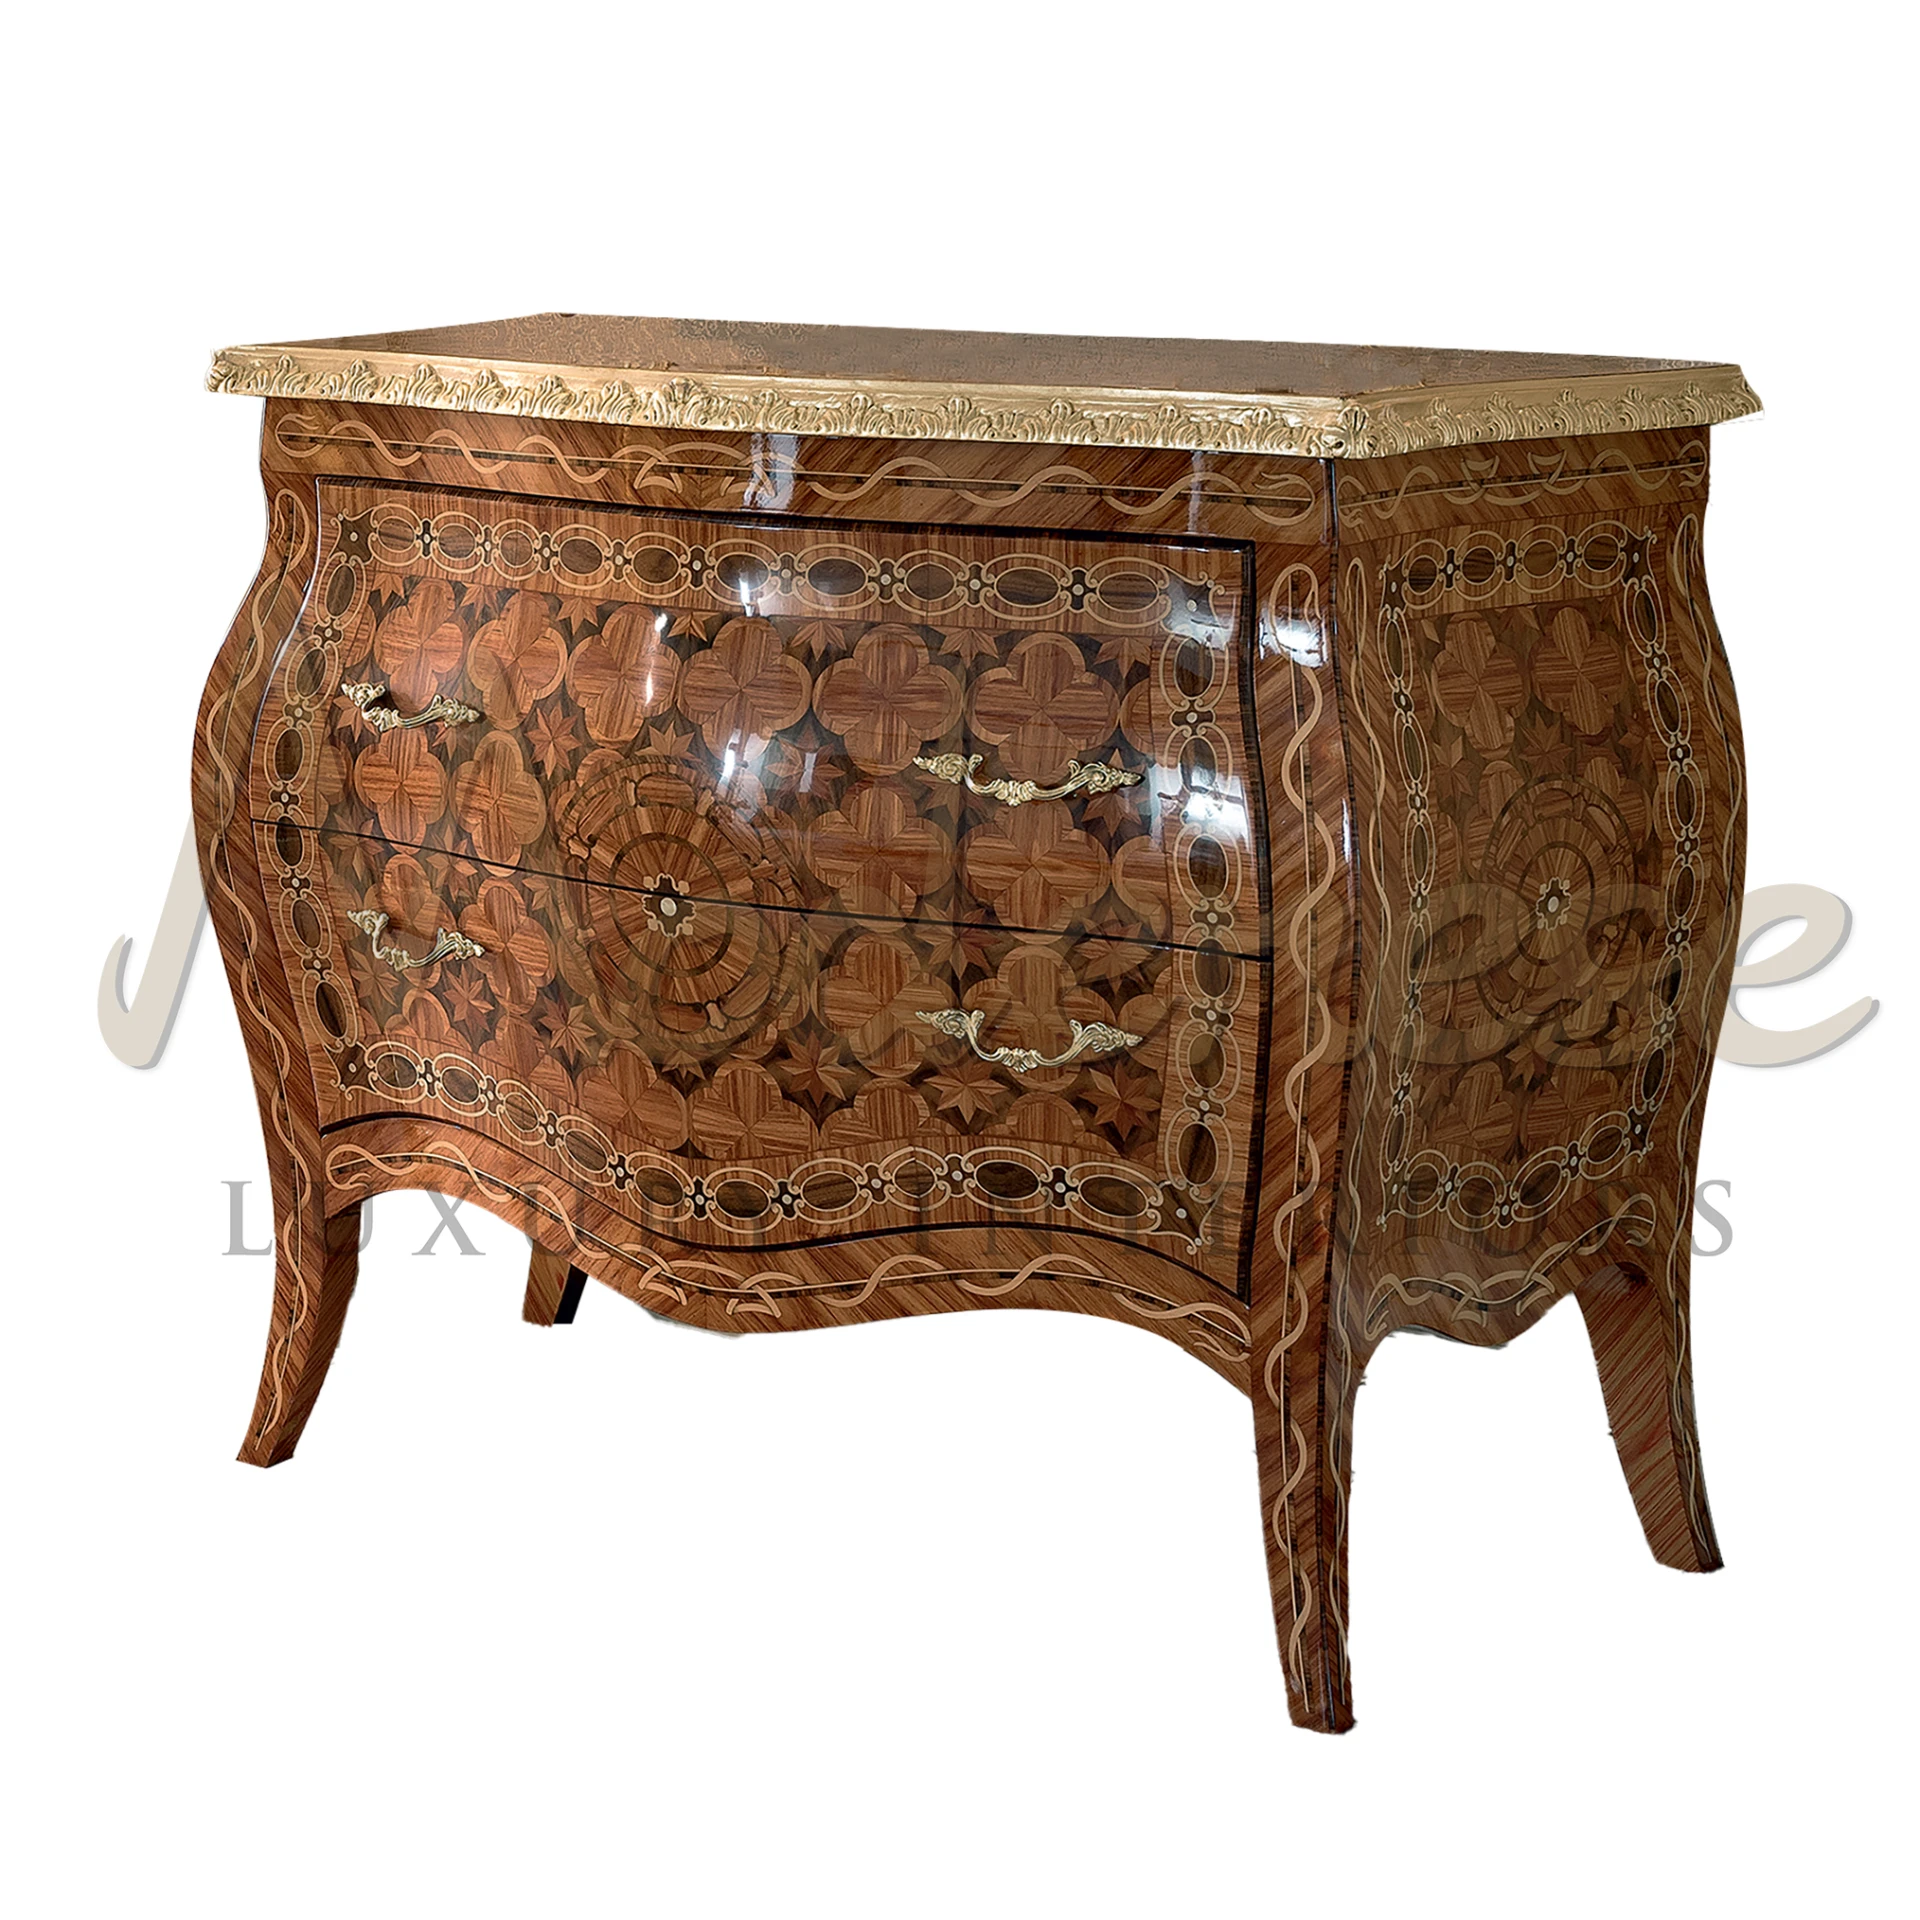 Luxurious Italian classical hand carved wood sideboard with golden design.